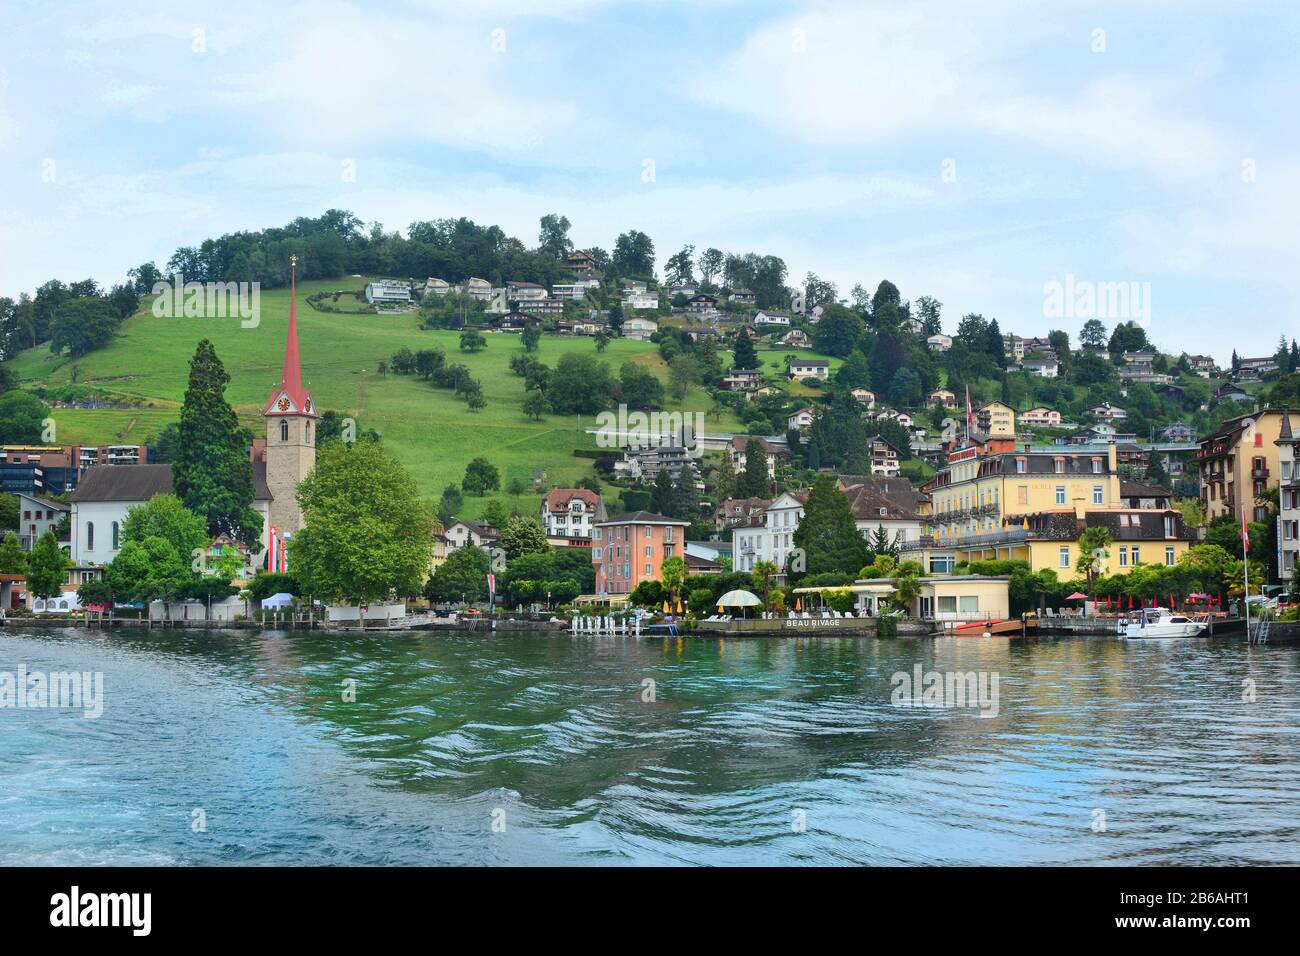 WEGGIS, SWITZERLAND - JULY 4, 2014: The Beau Rivage Hotel. A four star hotle in the town of Weggis on the shores of Lake Lucerne. Stock Photo